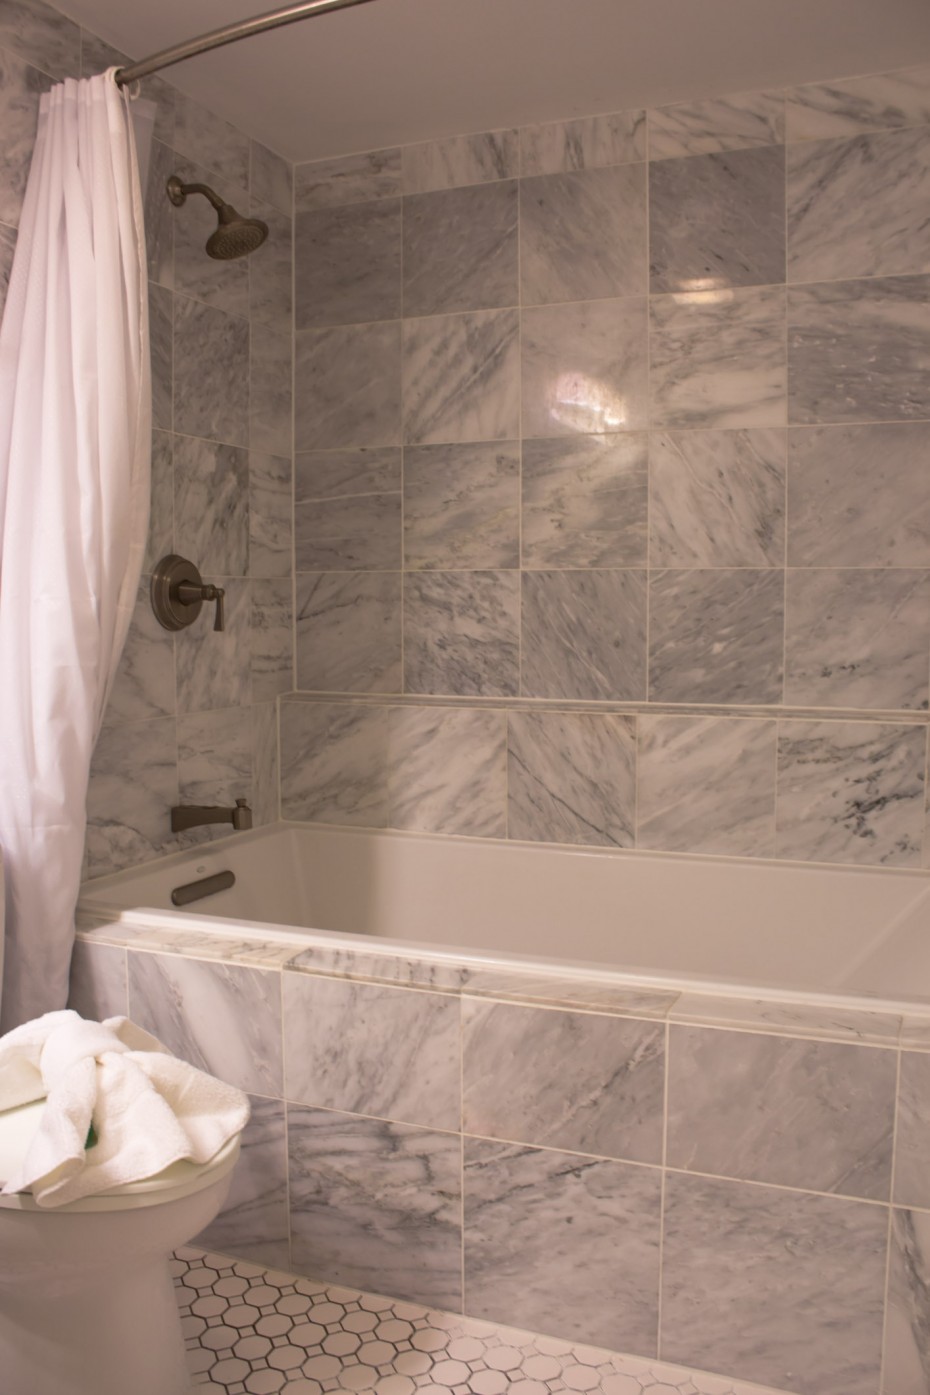 Enjoyable Gray Marble Subway Tile Wall Panelling Bath Escorted By White Rectangular Bathtub As Well As Burnished Bronze Wall Mount Shower Tub Combo Faucet As Well As White Shower Curtain In Vintage Bathroom